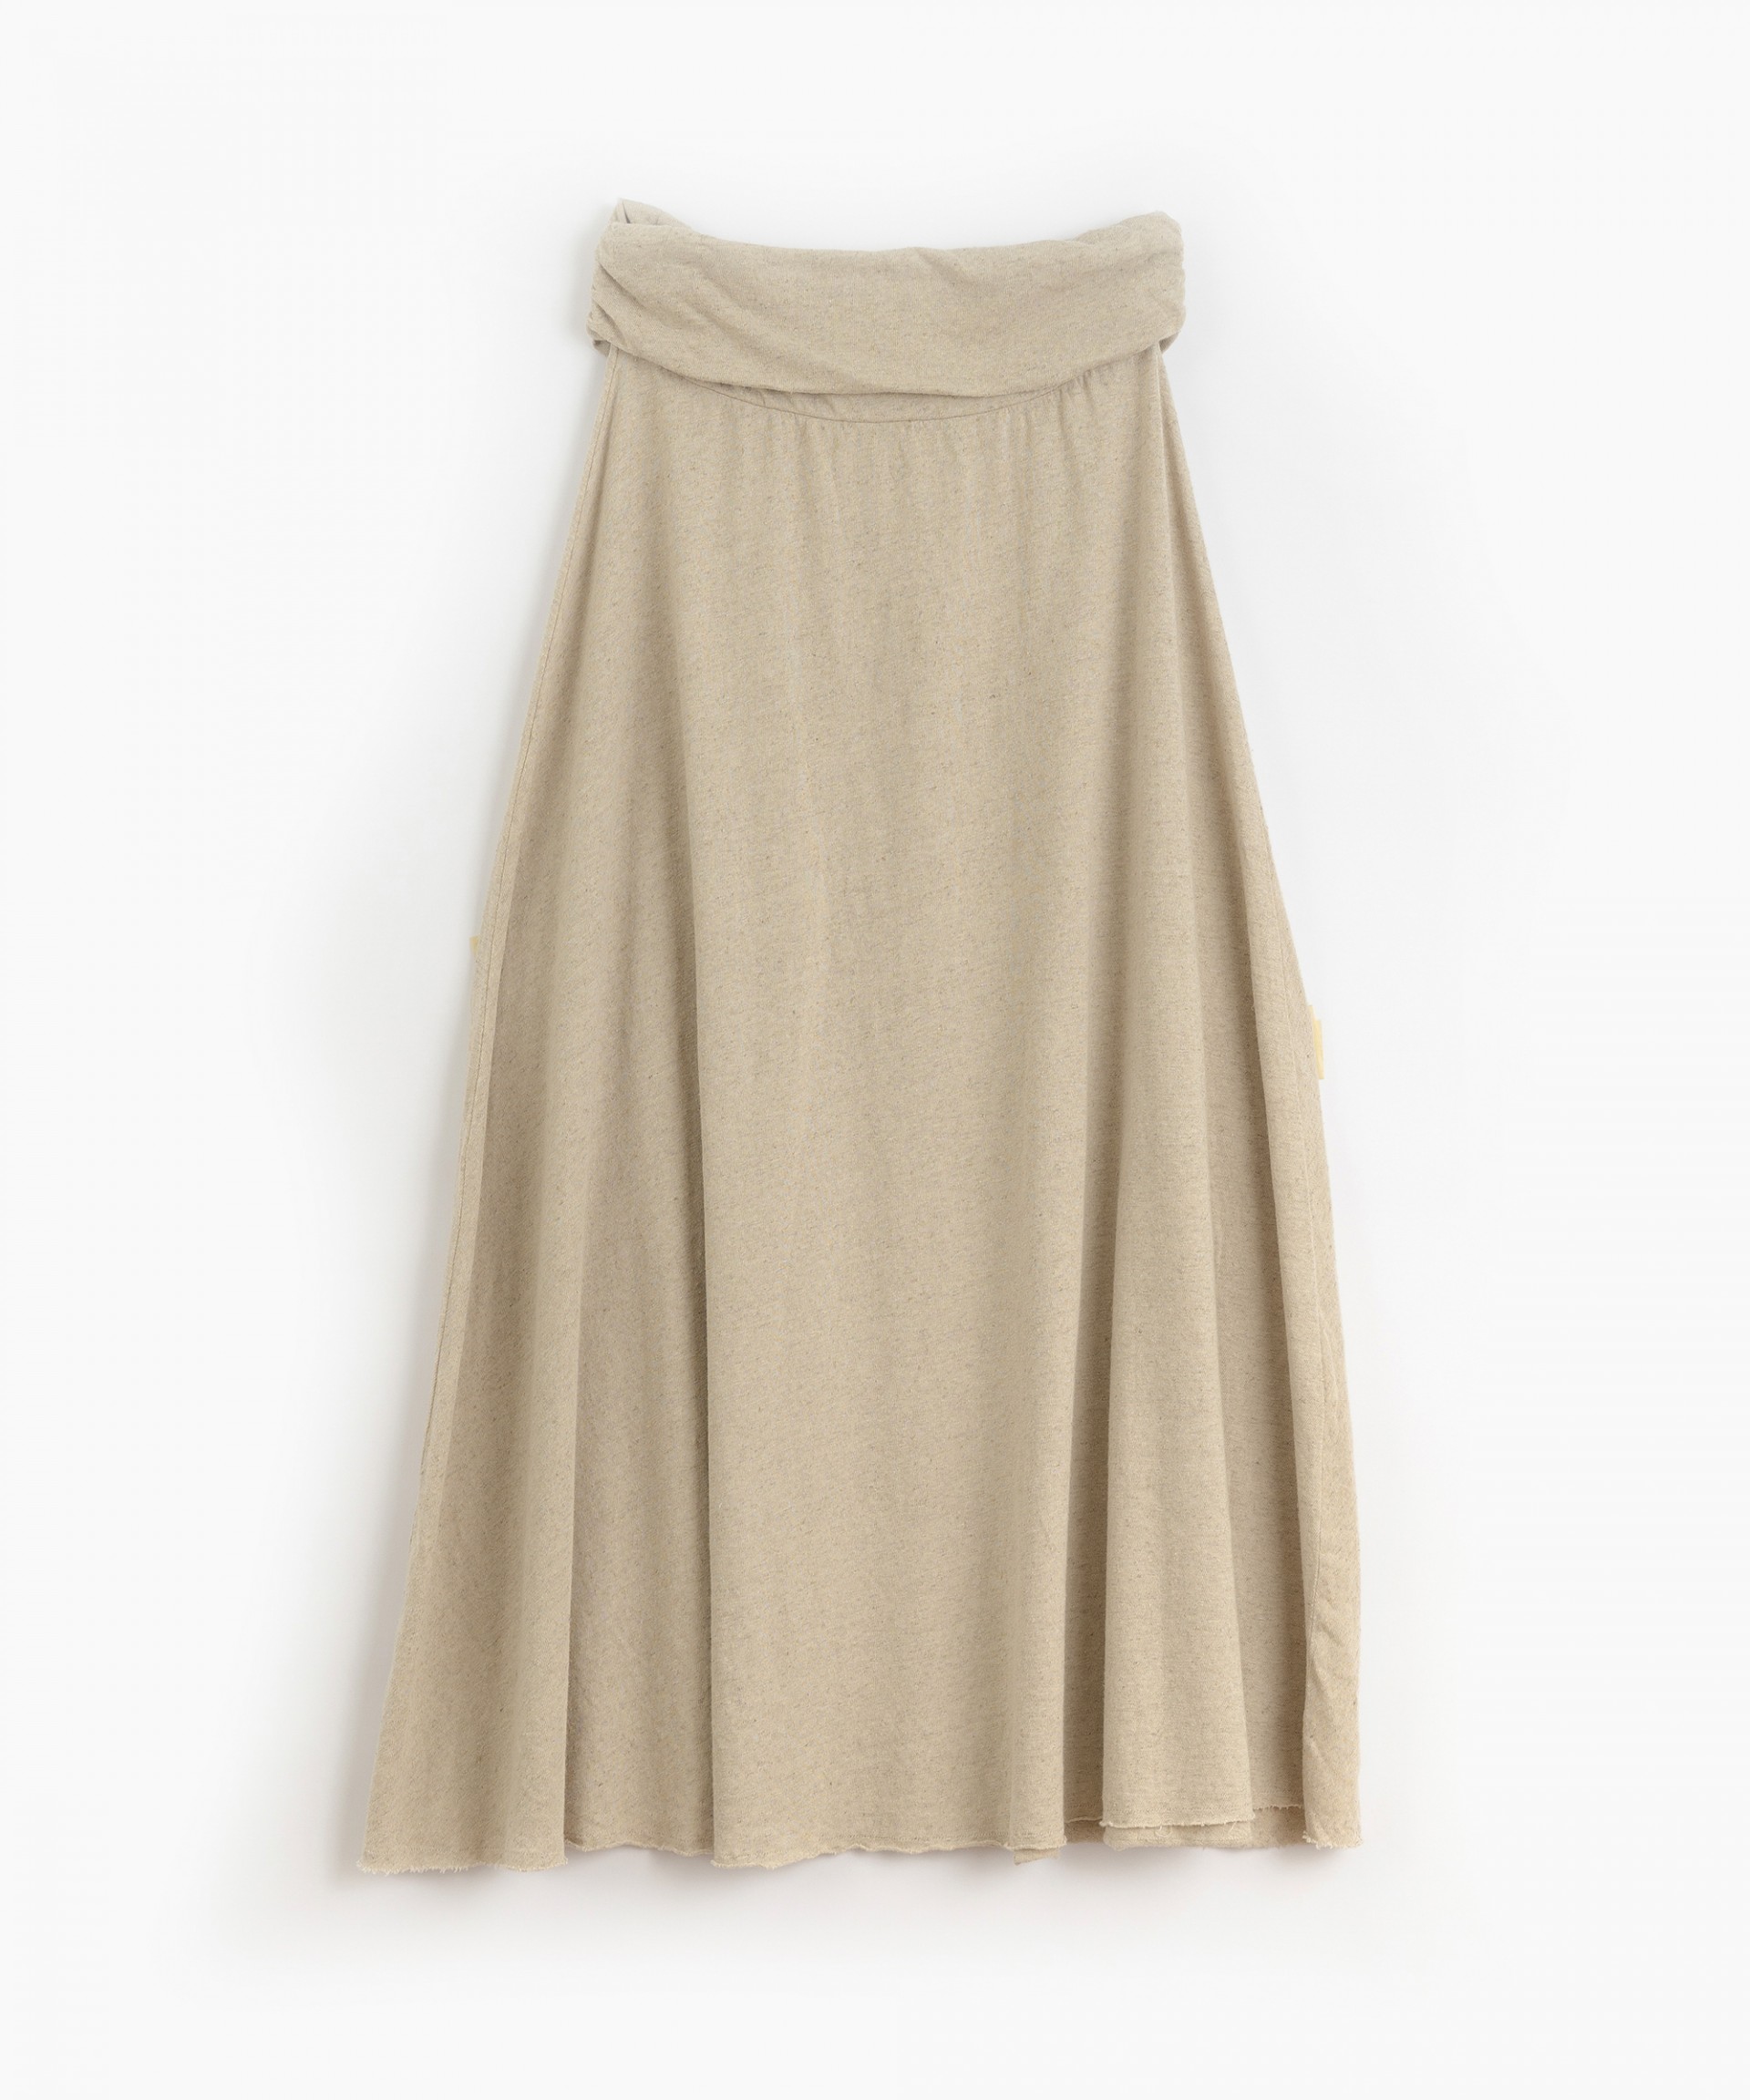 Jersey stitch skirt made of natural fibres | Organic Care